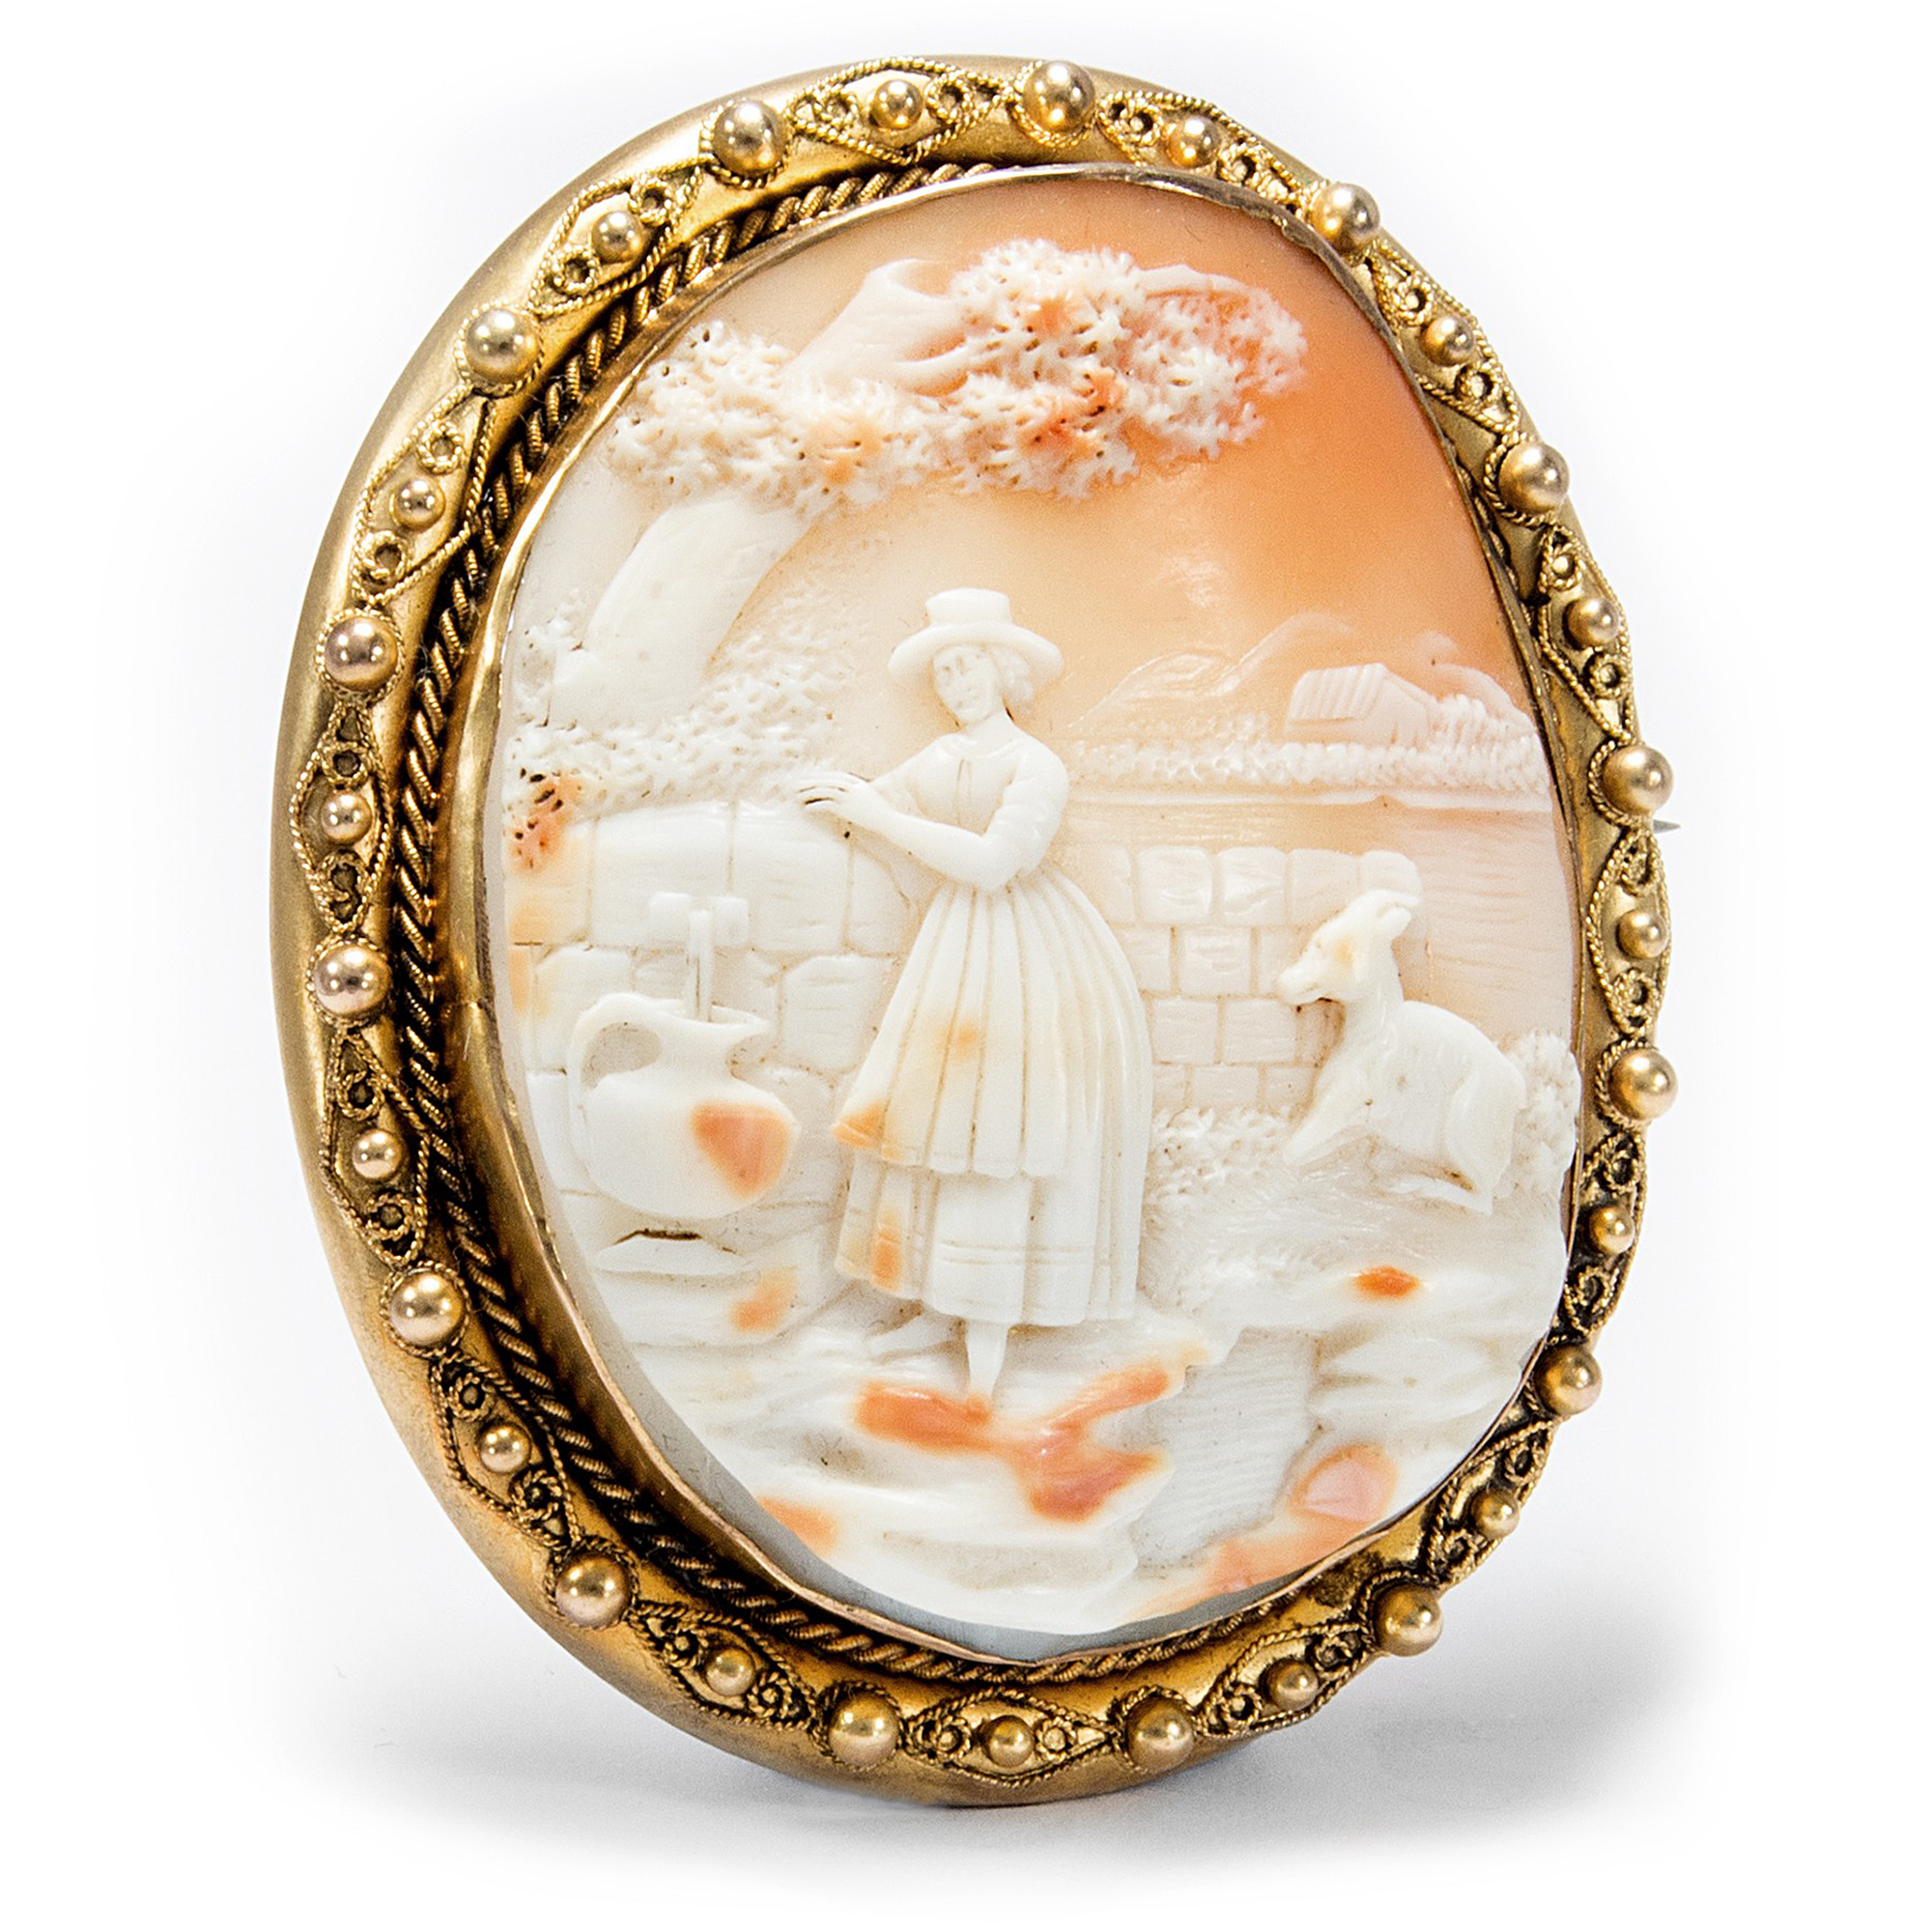 Shell cameo set in gold as brooch & pendant, France ca. 1850